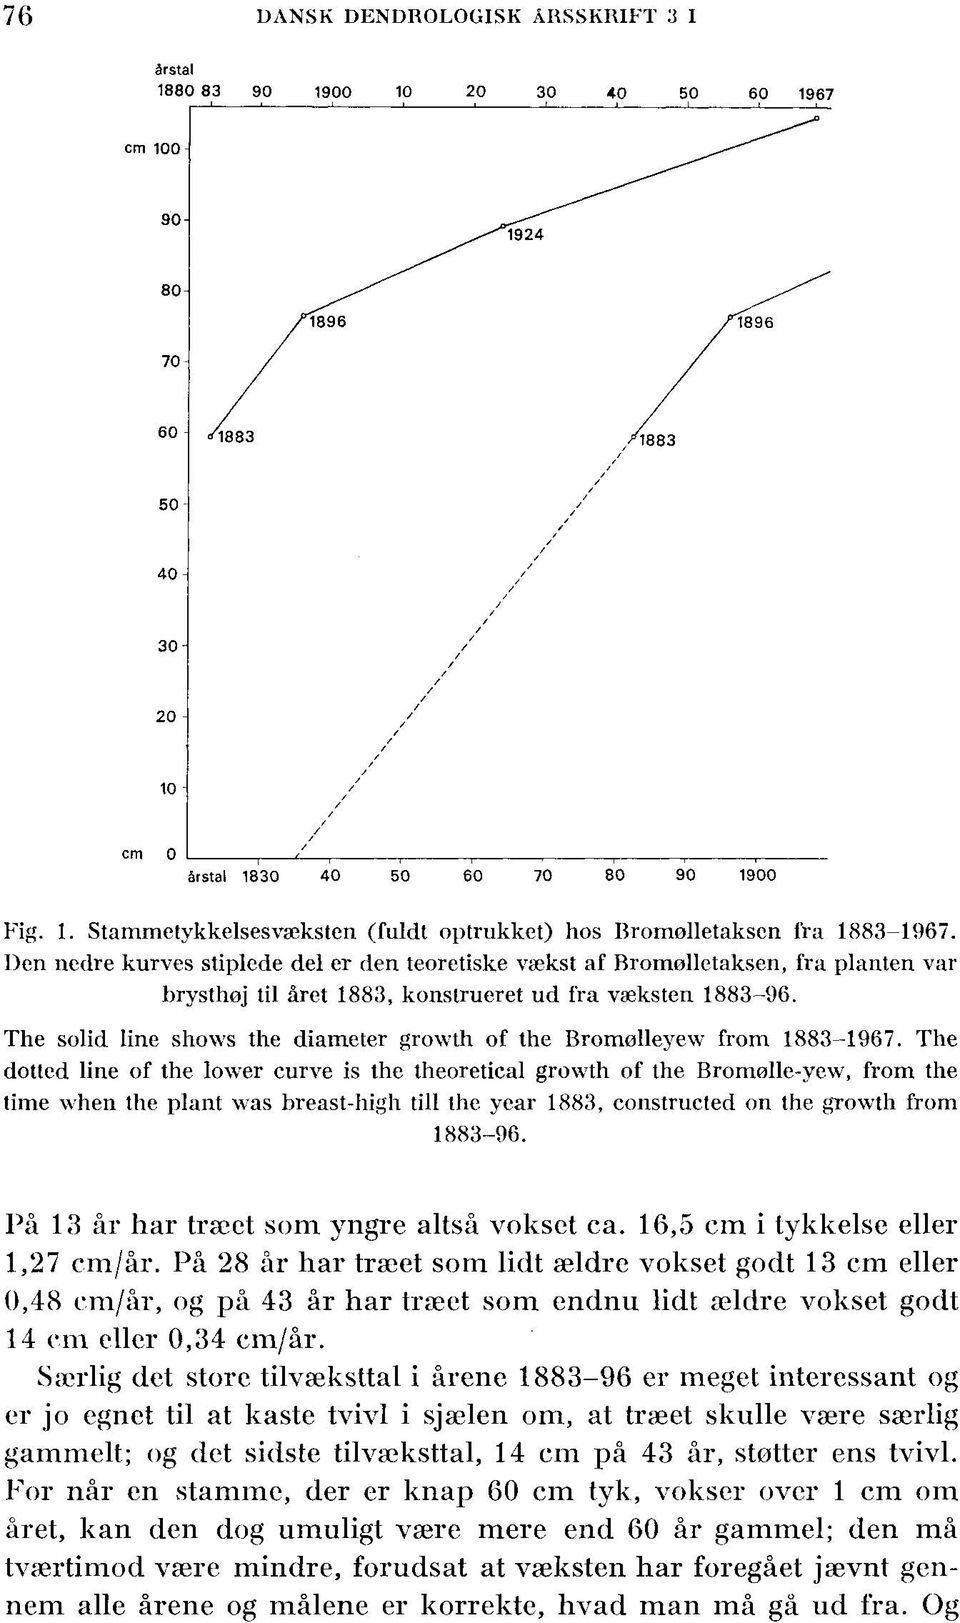 The solid line shows the diameter growth of the Bromølleyew from 1883-1967.